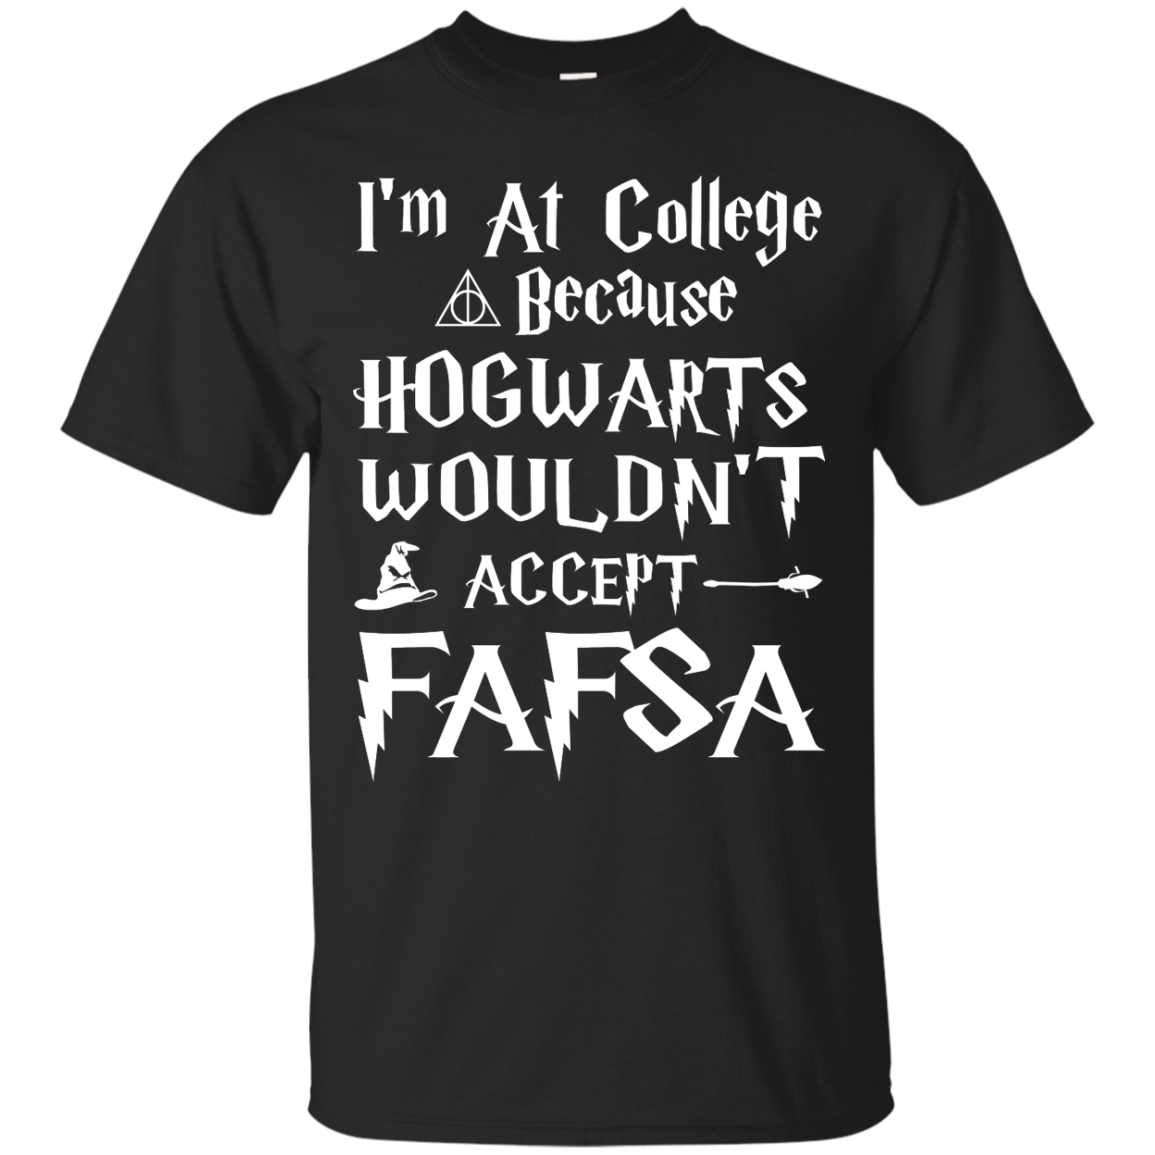 I'm At College Because Hogwarts Wouldn't Accept FAFSA shirt, sweater, tank